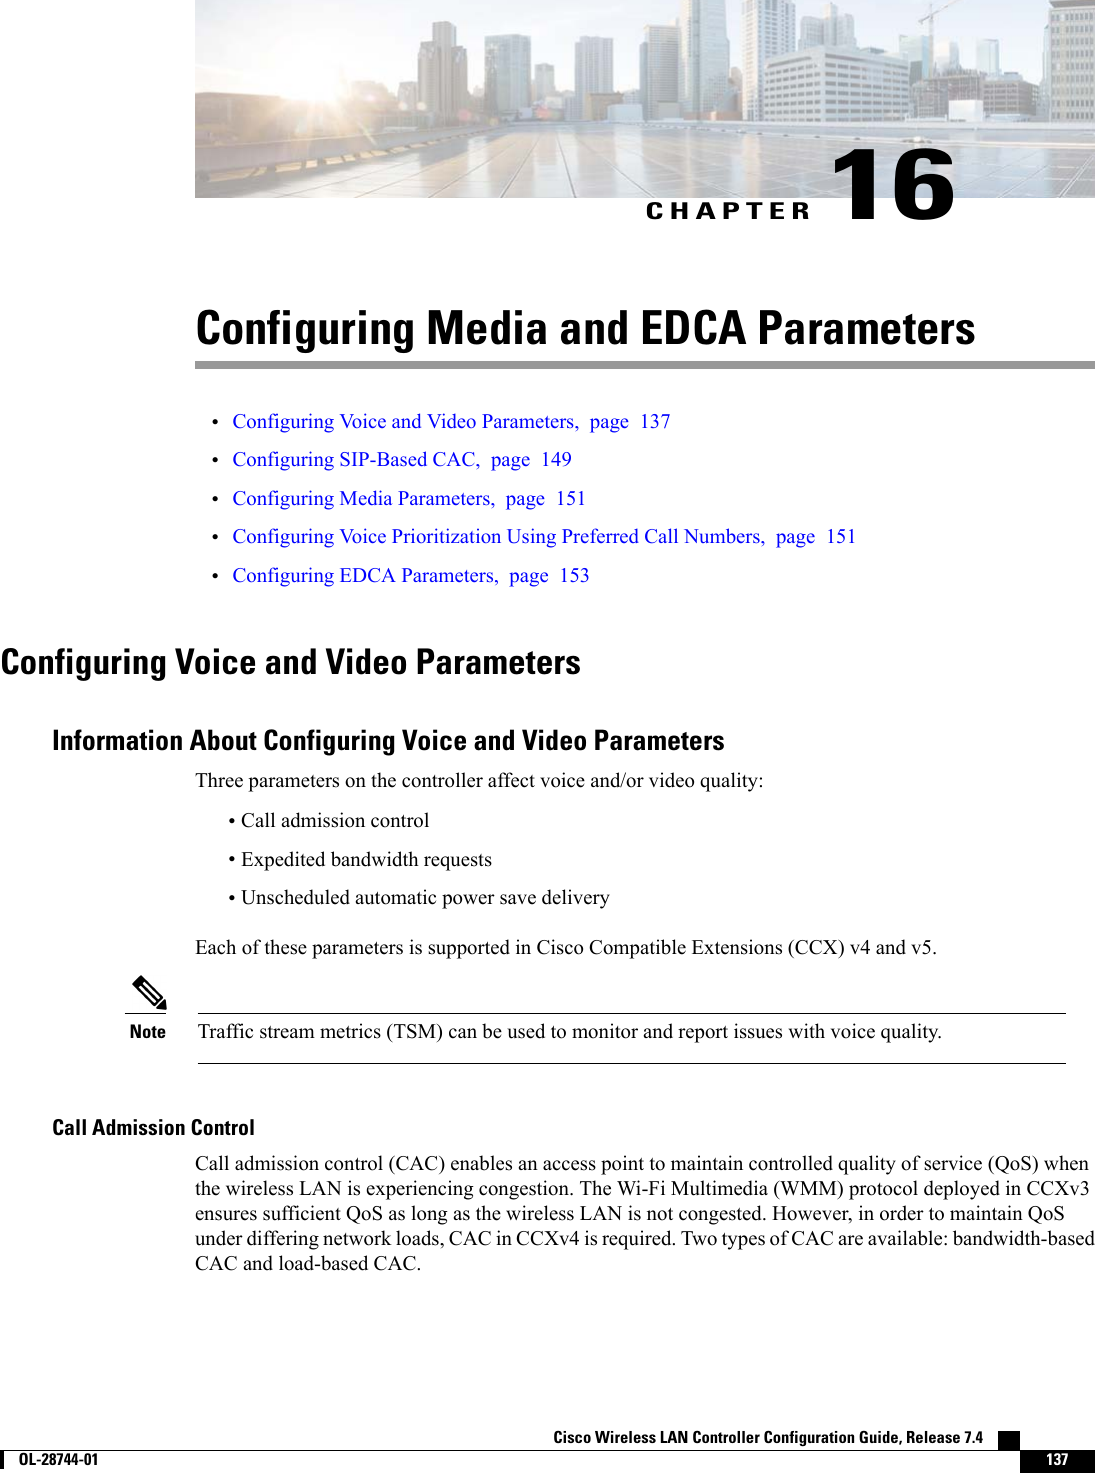 CHAPTER 16Configuring Media and EDCA Parameters•Configuring Voice and Video Parameters, page 137•Configuring SIP-Based CAC, page 149•Configuring Media Parameters, page 151•Configuring Voice Prioritization Using Preferred Call Numbers, page 151•Configuring EDCA Parameters, page 153Configuring Voice and Video ParametersInformation About Configuring Voice and Video ParametersThree parameters on the controller affect voice and/or video quality:•Call admission control•Expedited bandwidth requests•Unscheduled automatic power save deliveryEach of these parameters is supported in Cisco Compatible Extensions (CCX) v4 and v5.Traffic stream metrics (TSM) can be used to monitor and report issues with voice quality.NoteCall Admission ControlCall admission control (CAC) enables an access point to maintain controlled quality of service (QoS) whenthe wireless LAN is experiencing congestion. The Wi-Fi Multimedia (WMM) protocol deployed in CCXv3ensures sufficient QoS as long as the wireless LAN is not congested. However, in order to maintain QoSunder differing network loads, CAC in CCXv4 is required. Two types of CAC are available: bandwidth-basedCAC and load-based CAC.Cisco Wireless LAN Controller Configuration Guide, Release 7.4        OL-28744-01 137